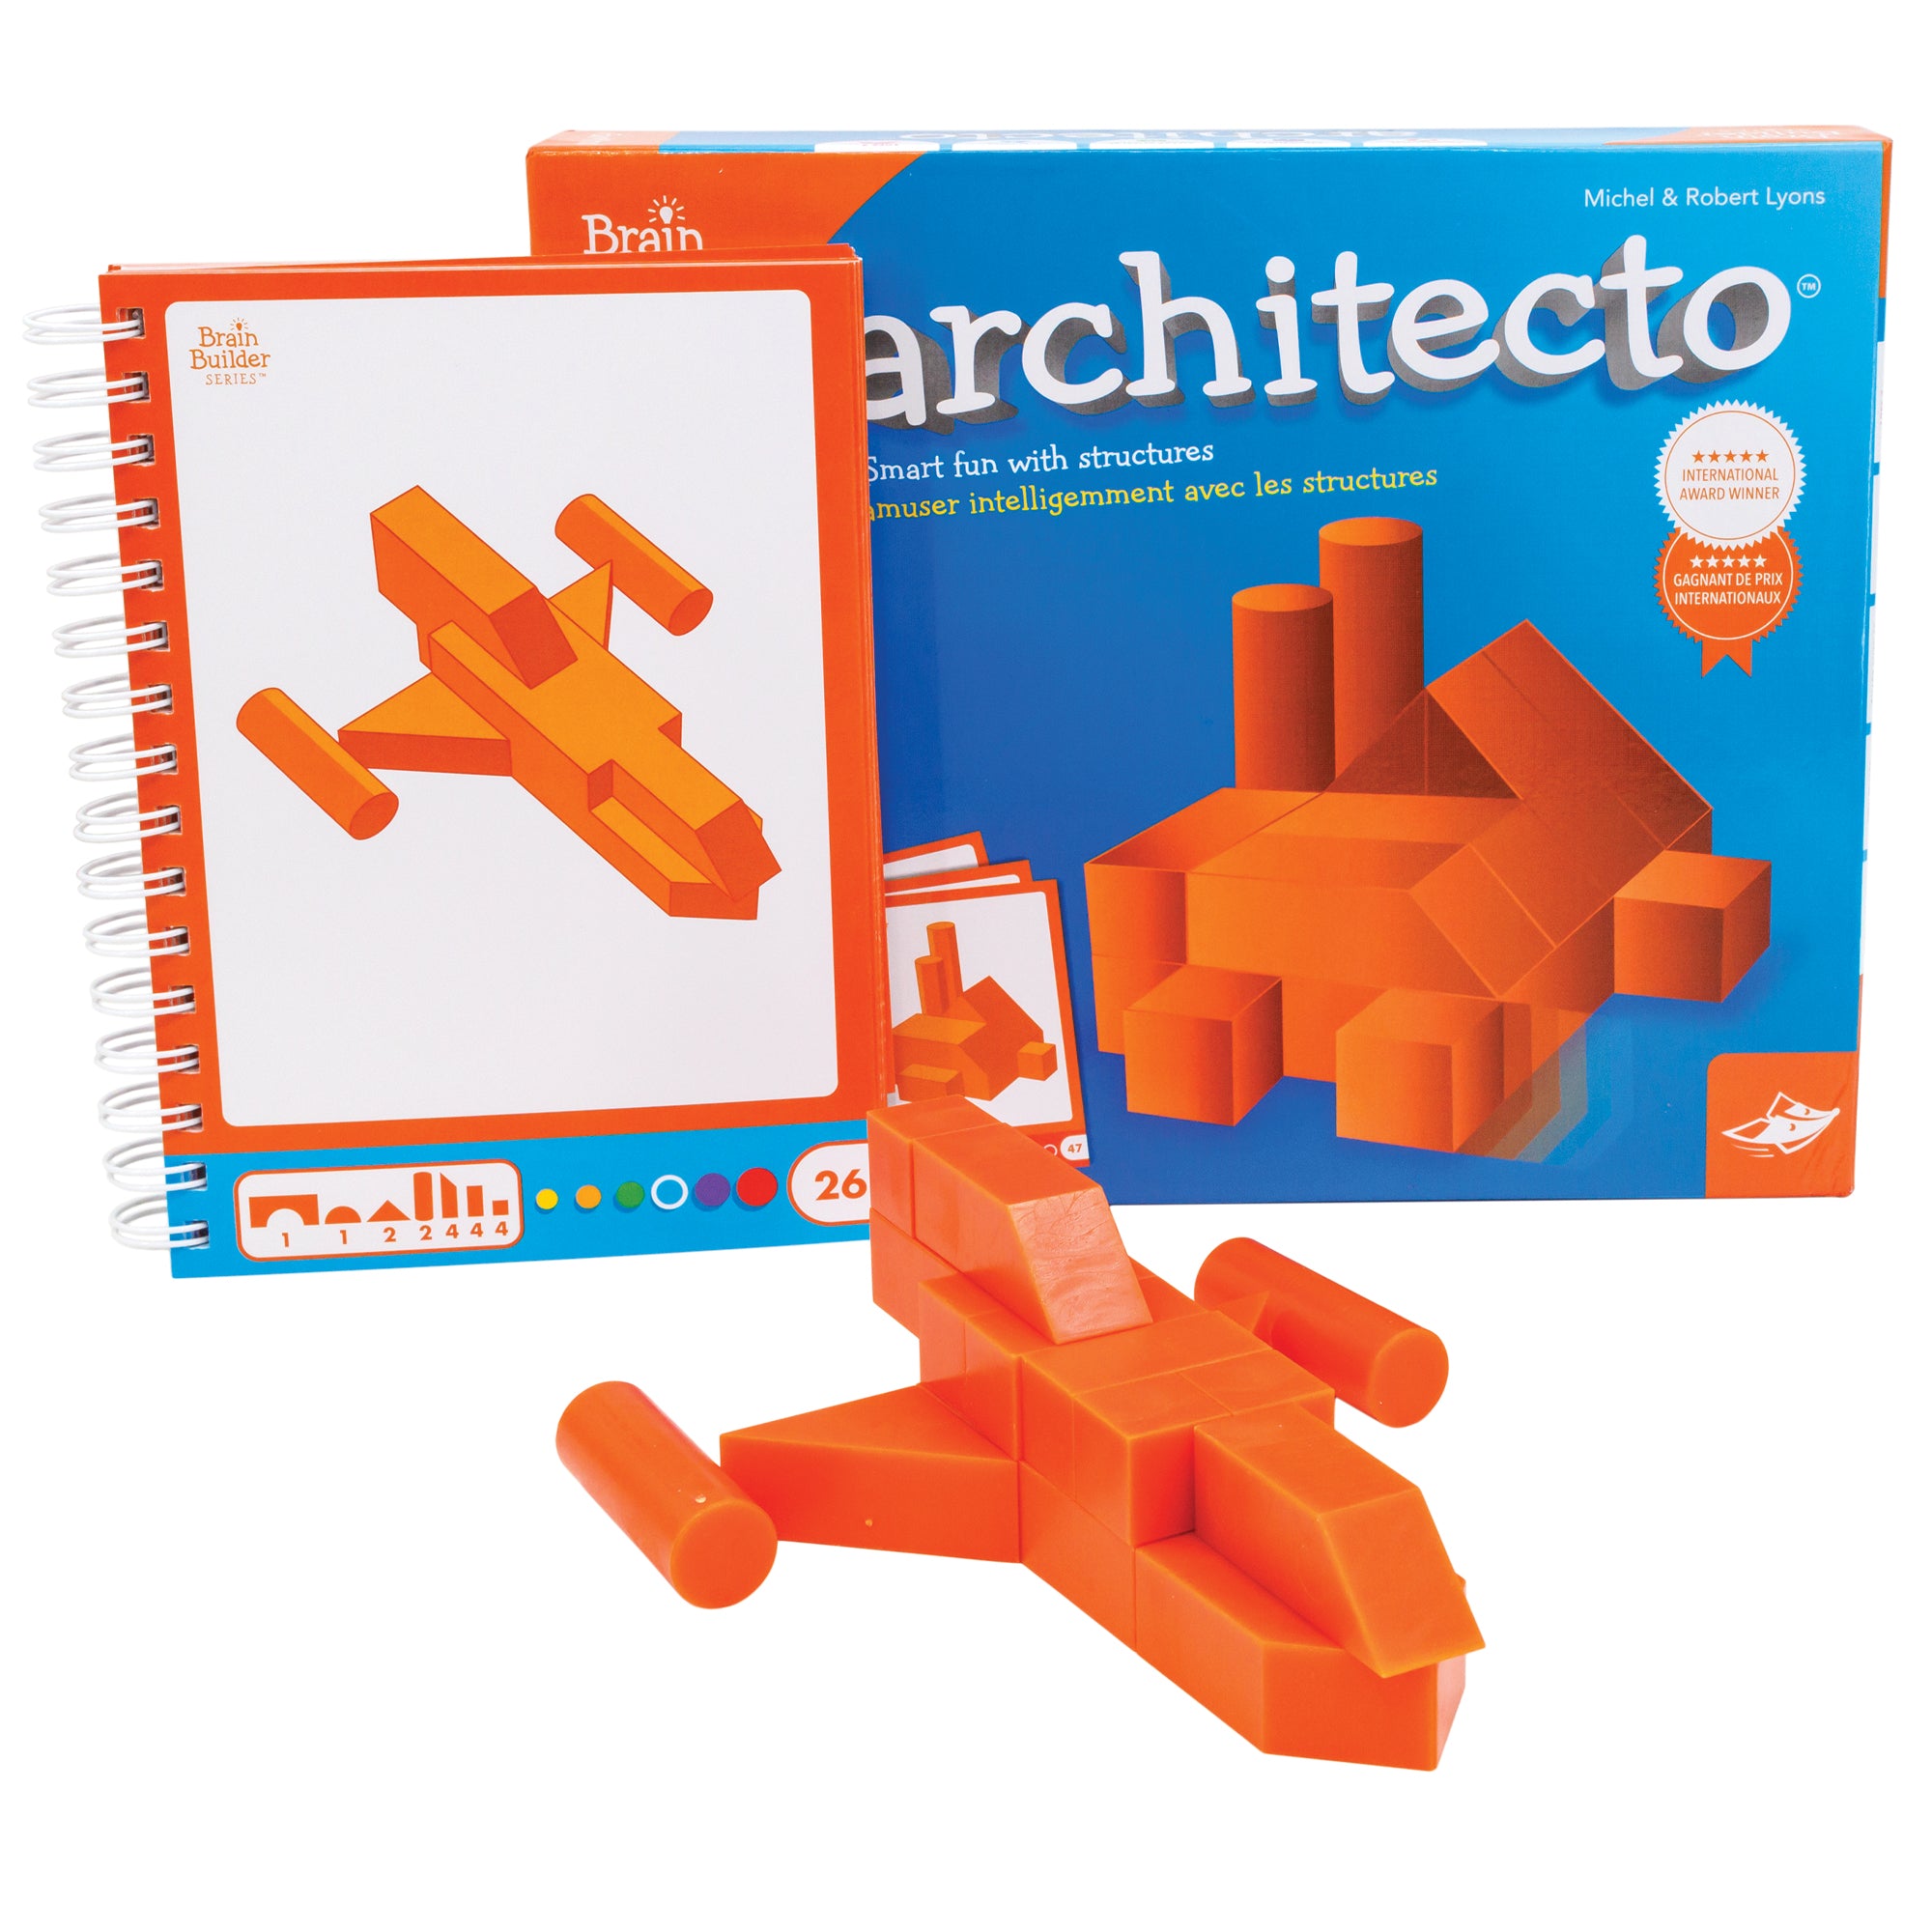 The Architecto game box with a completed project. The box in the back is mostly blue with an illustration in the middle of a factory looking structure created from the orange Architecto pieces. The spiral-bound activity book to the left shows a jet created from the Architecto pieces and the pieces needed to make the structure shown on the bottom. In front is the completed challenge. The pieces seen in the structure are orange triangles, cylinders, rectangles and squares.